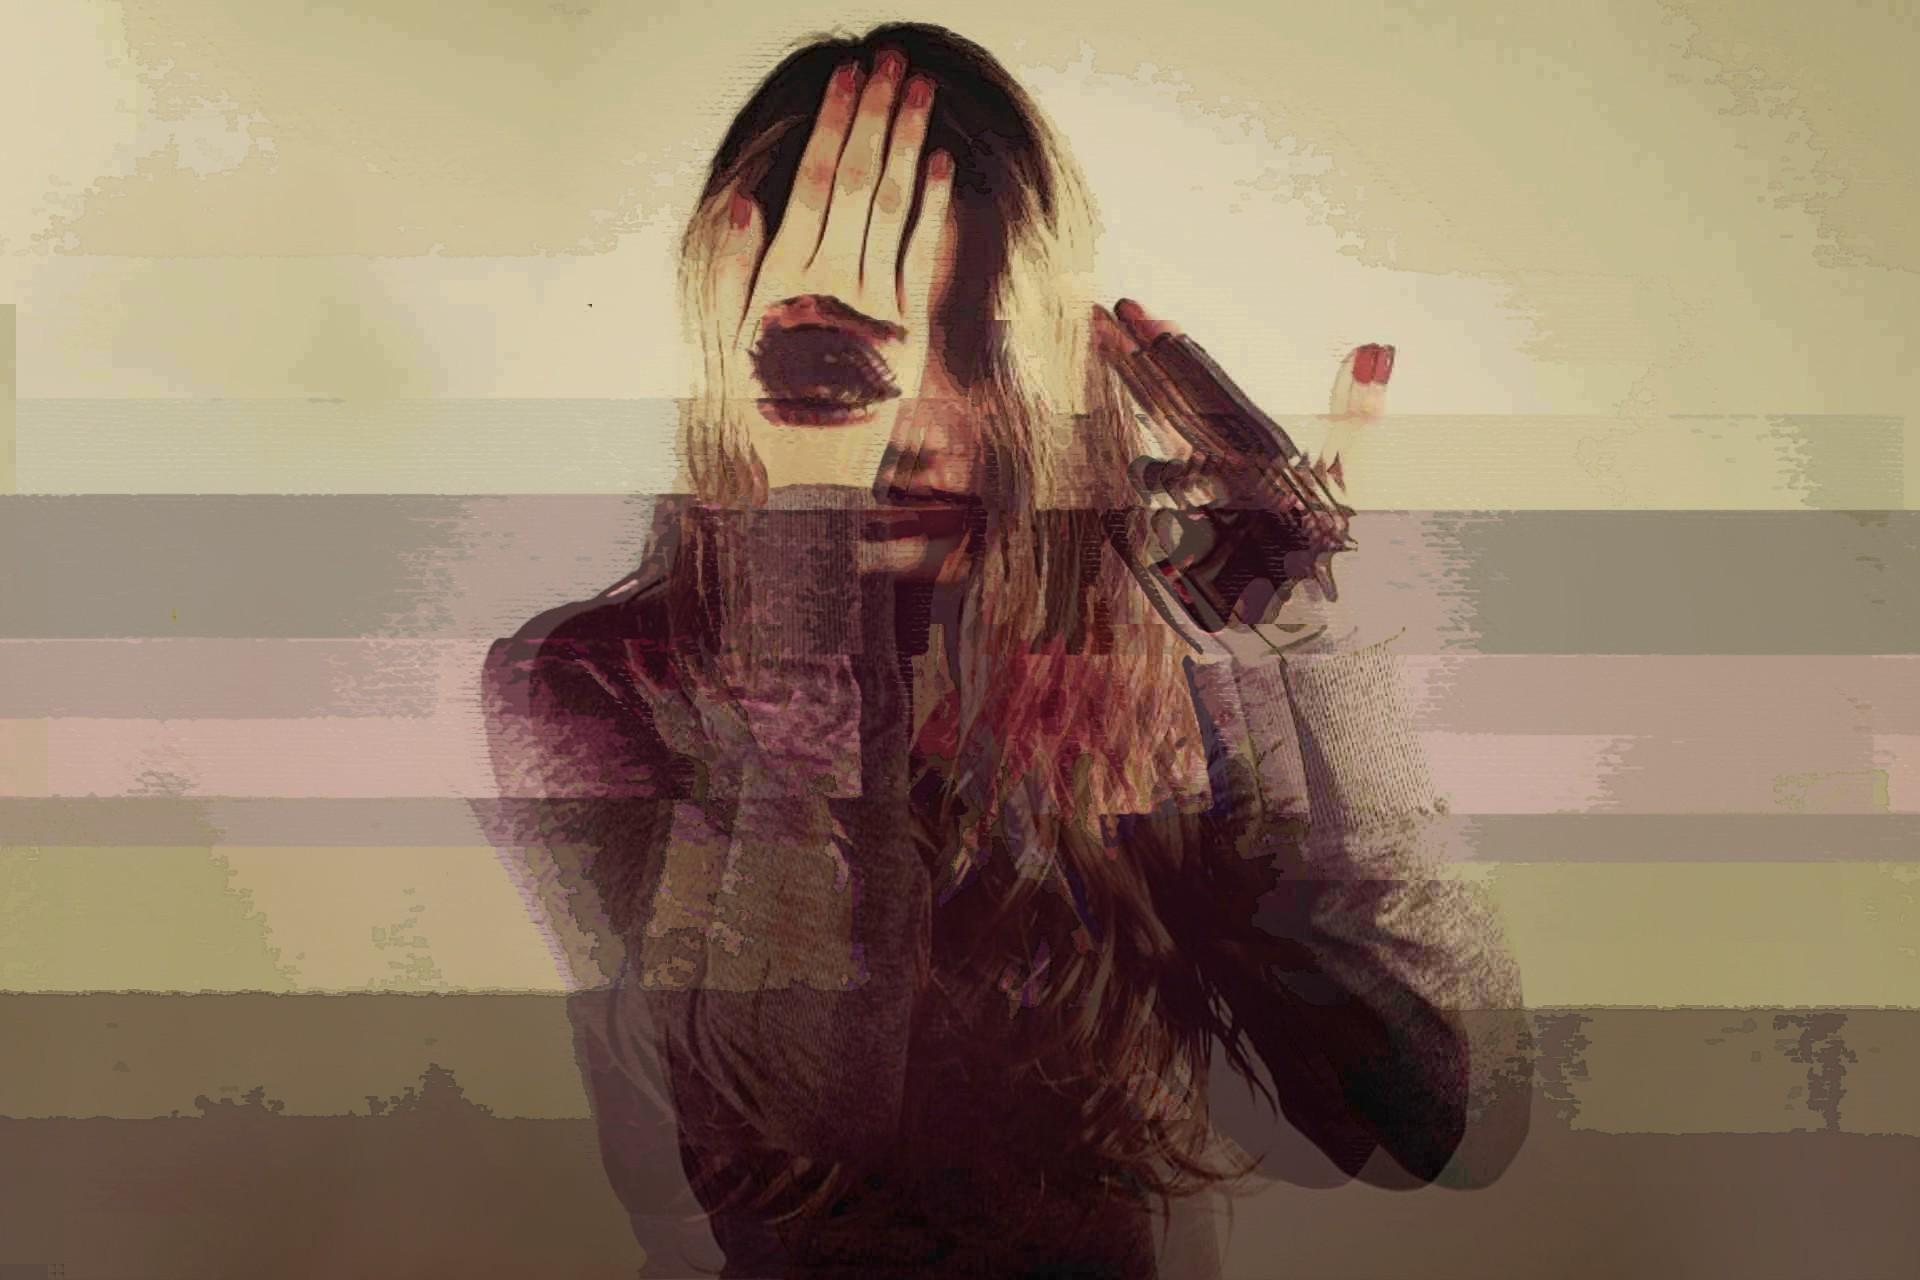 glitch art women suicide wallpaper and background. Abstract